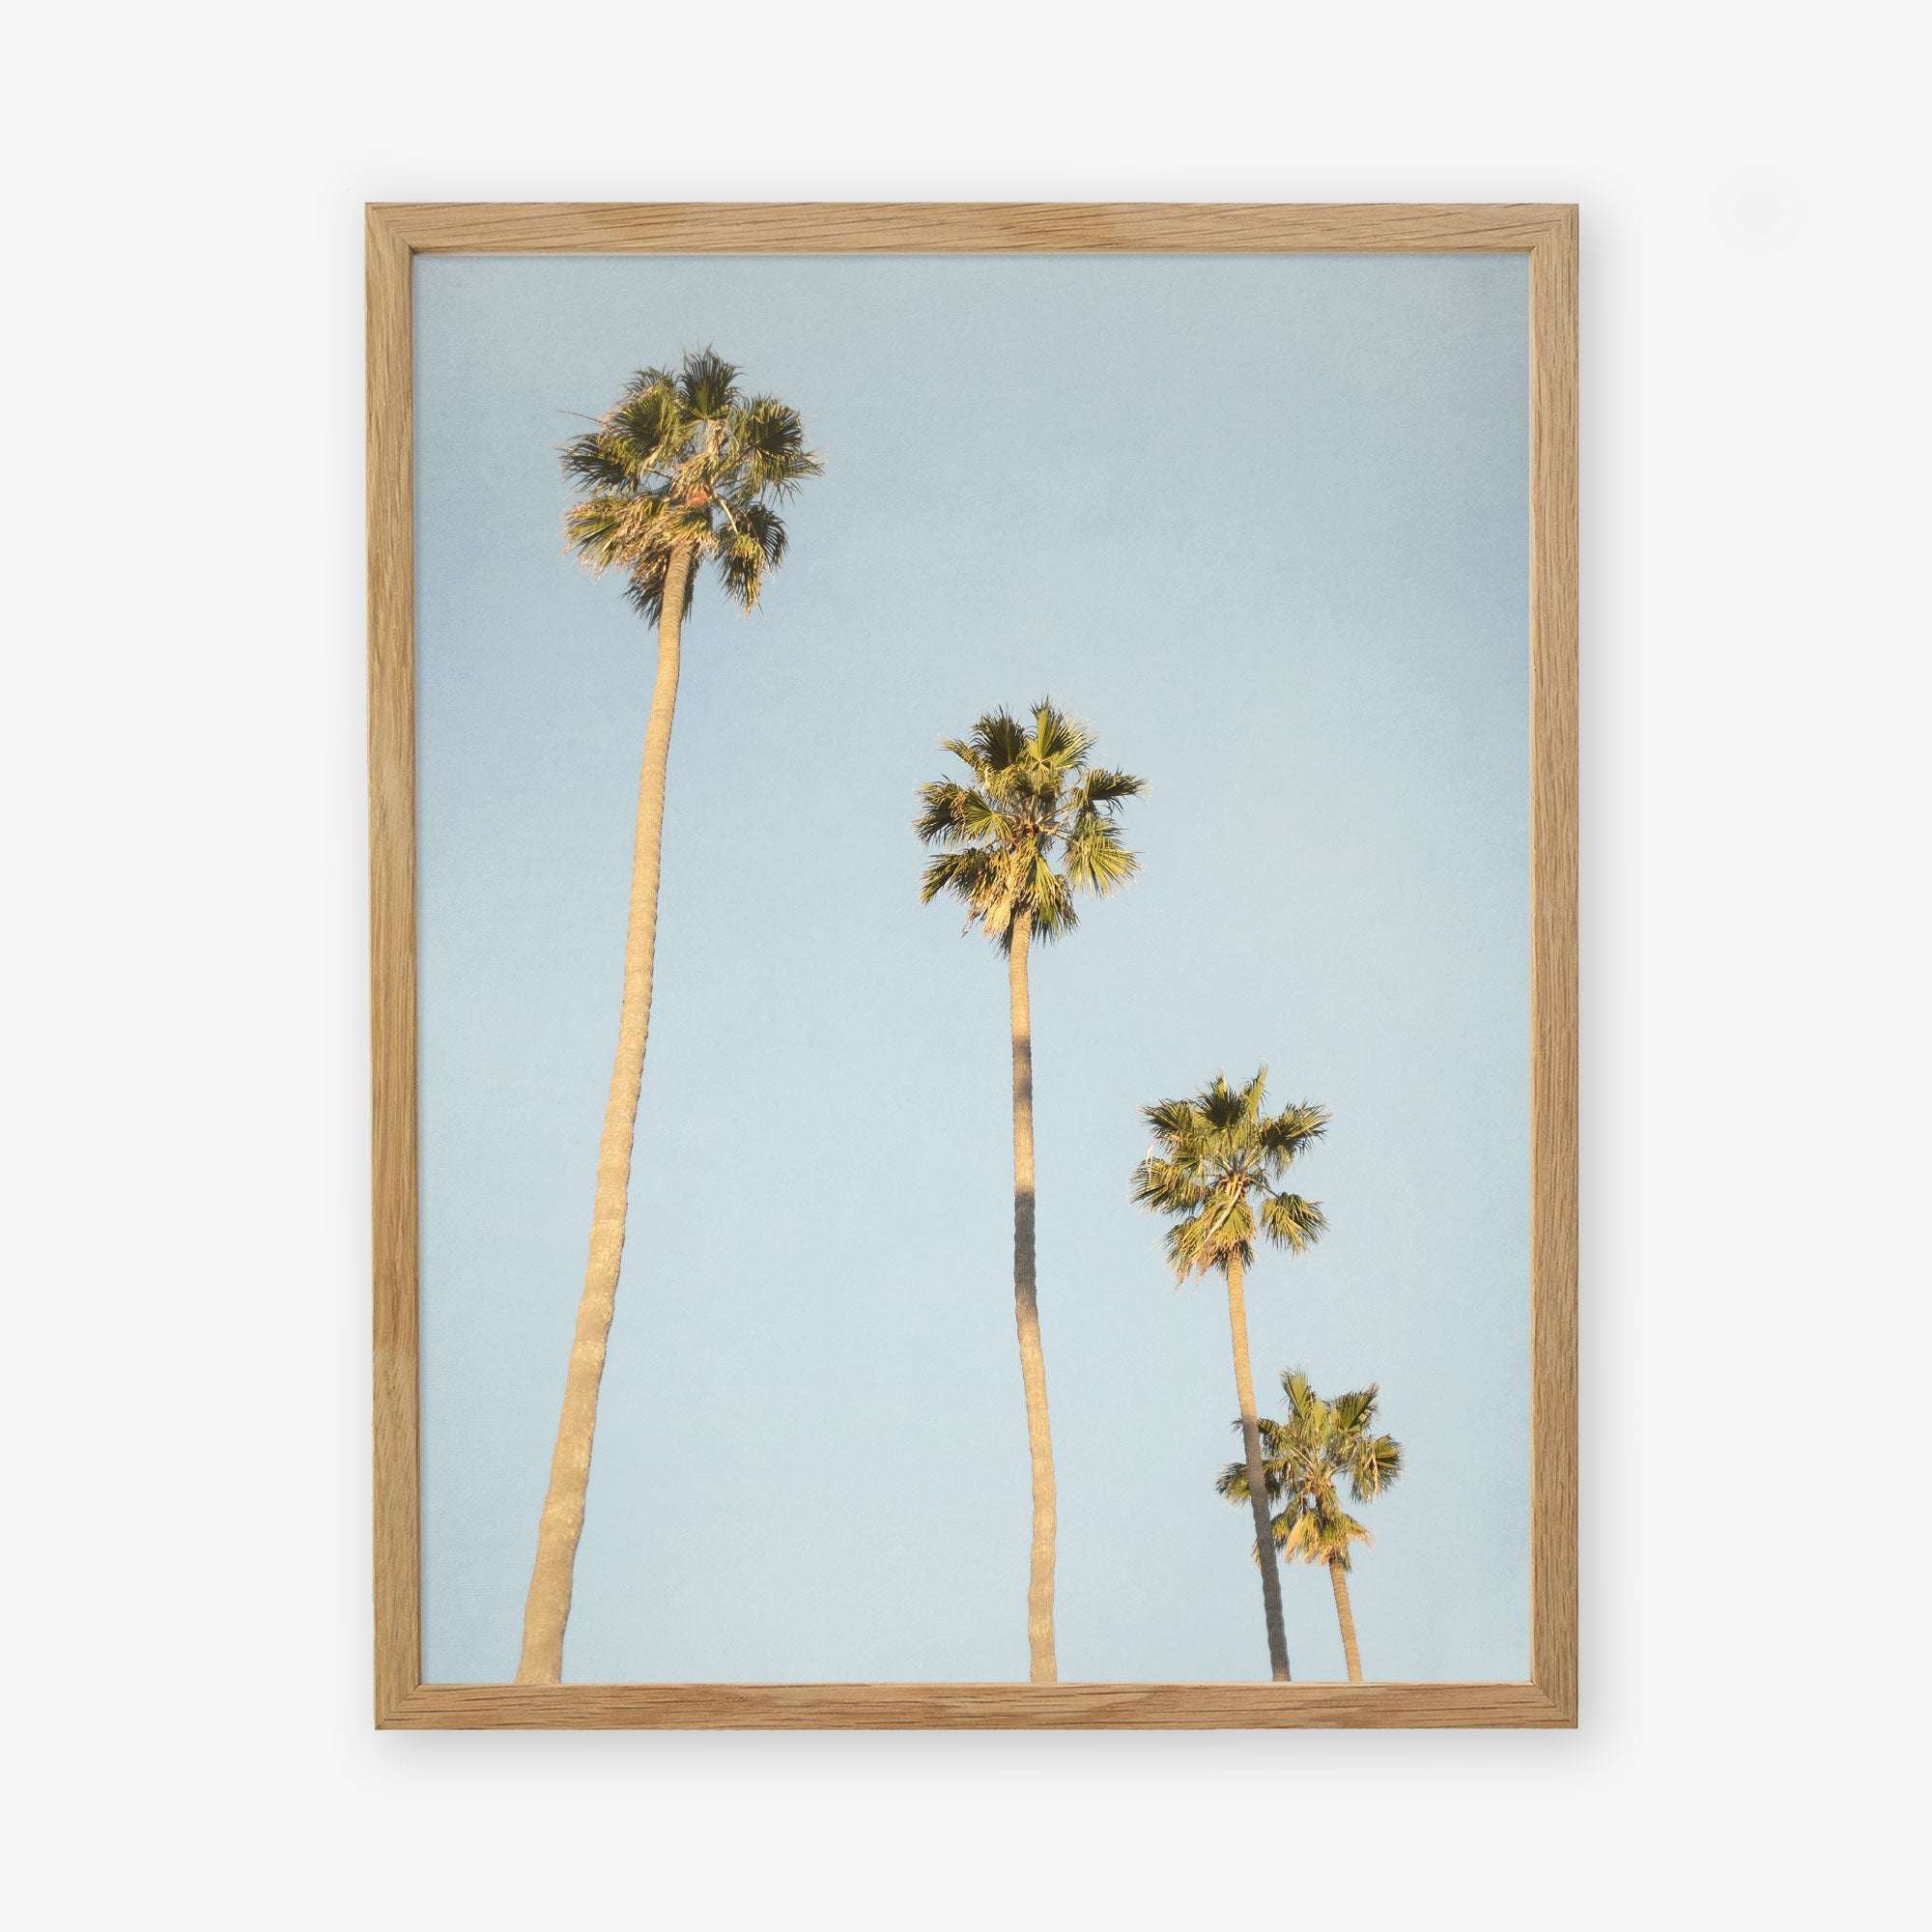 A framed photograph of the Los Angeles Palm Tree Photographic Print &#39;Palm Stairs to Heaven&#39;, displayed in a light wooden frame by Offley Green.